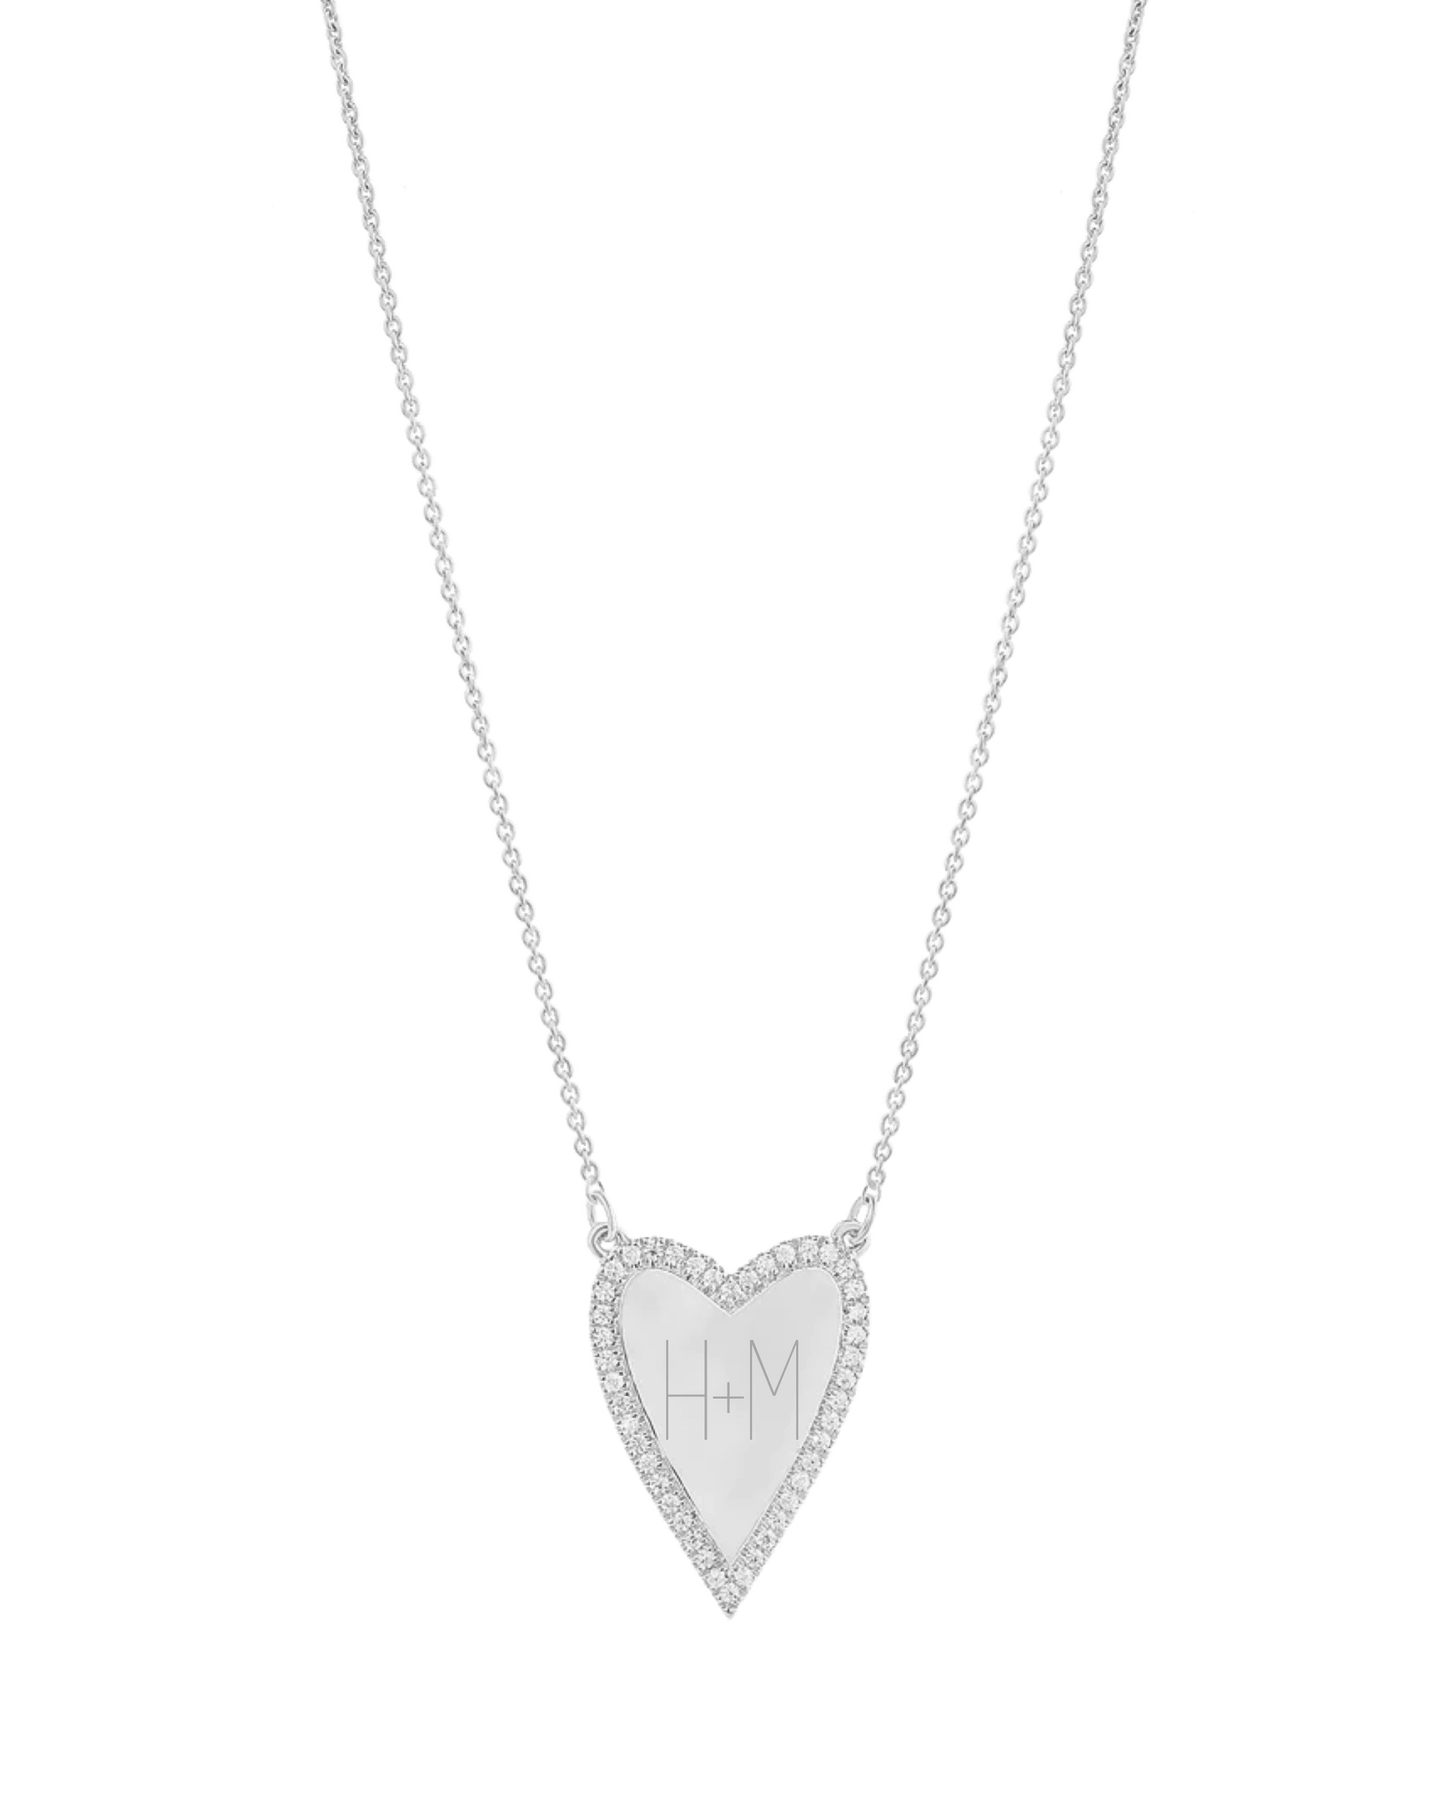 Engravable Outlined Heart Diamond Necklace - 925 Sterling Silver Necklaces magal-dev Adjustable 16"-17" 